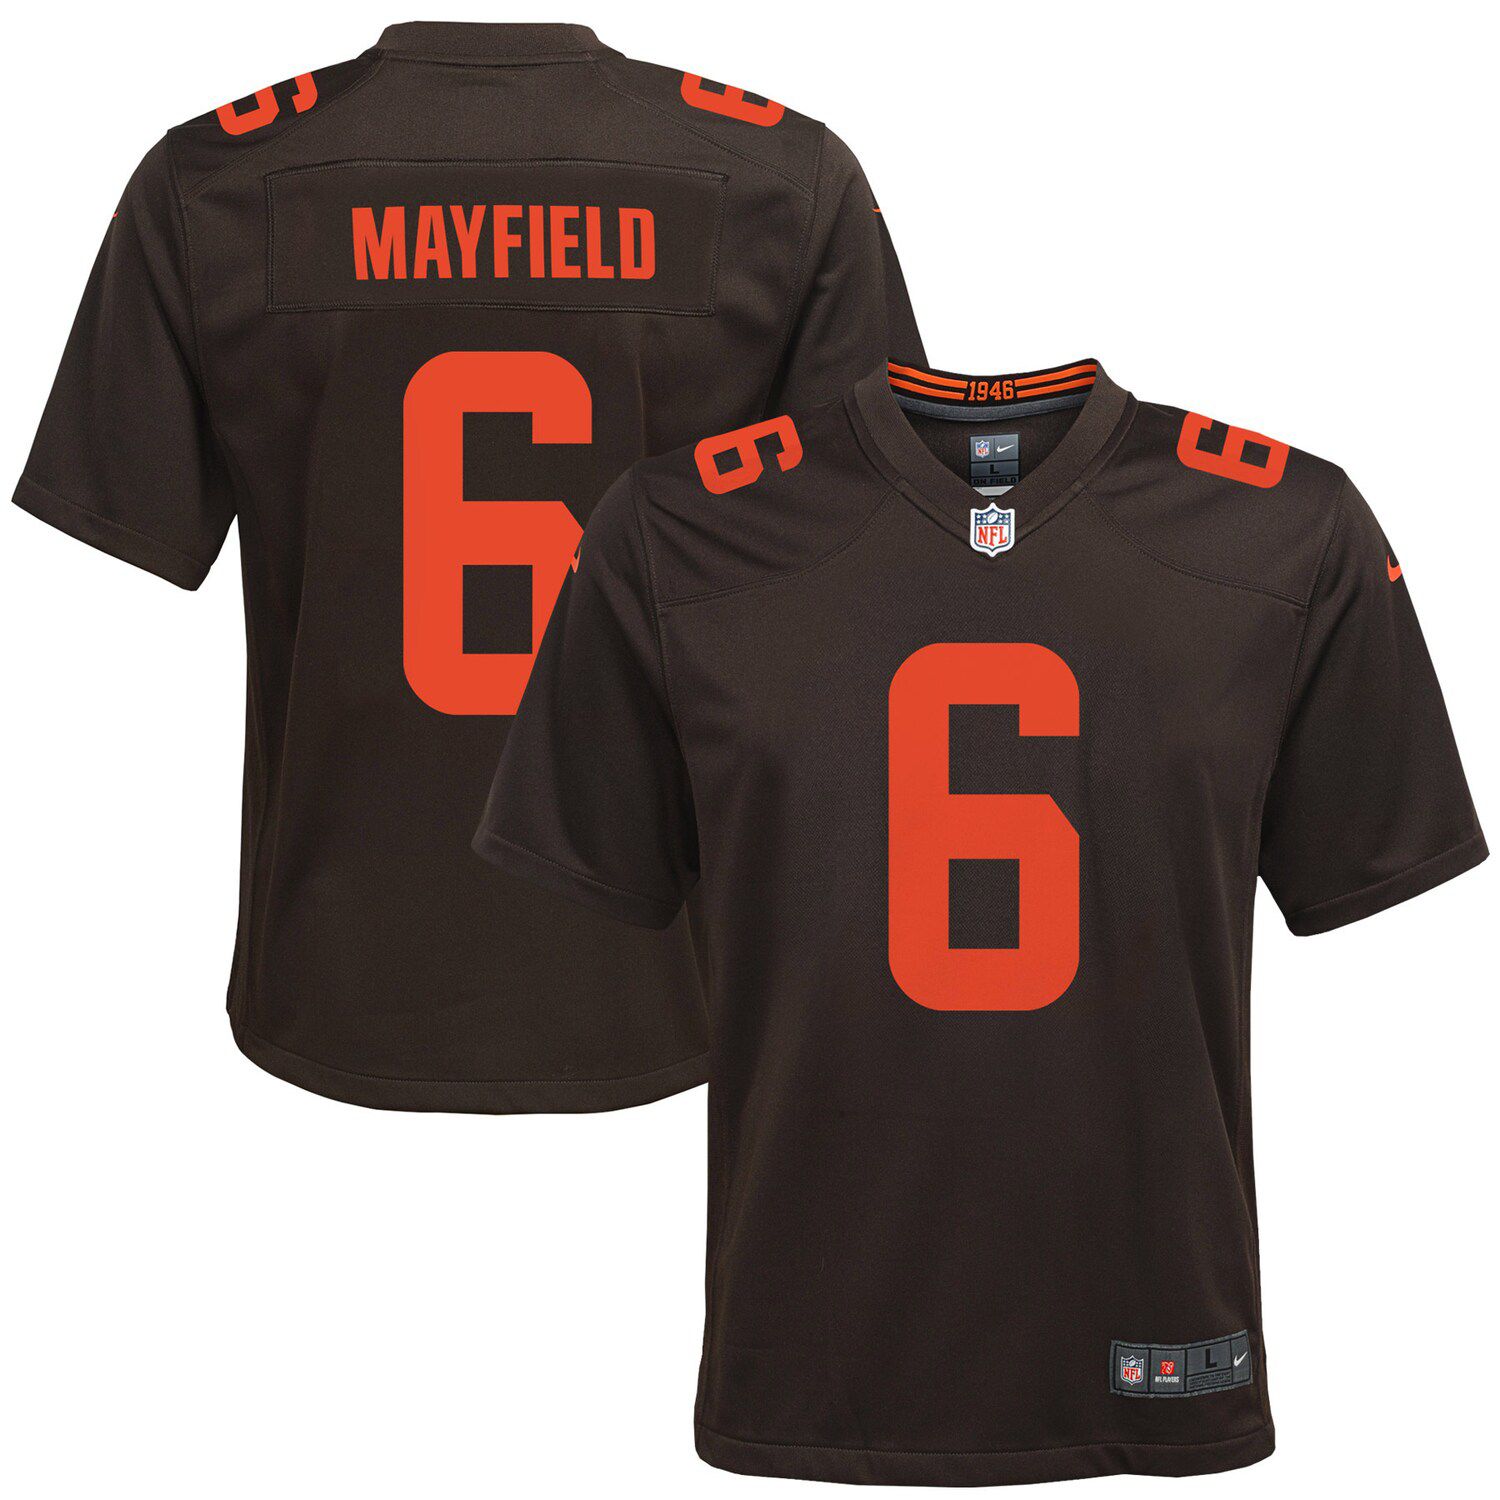 baker mayfield browns youth jersey